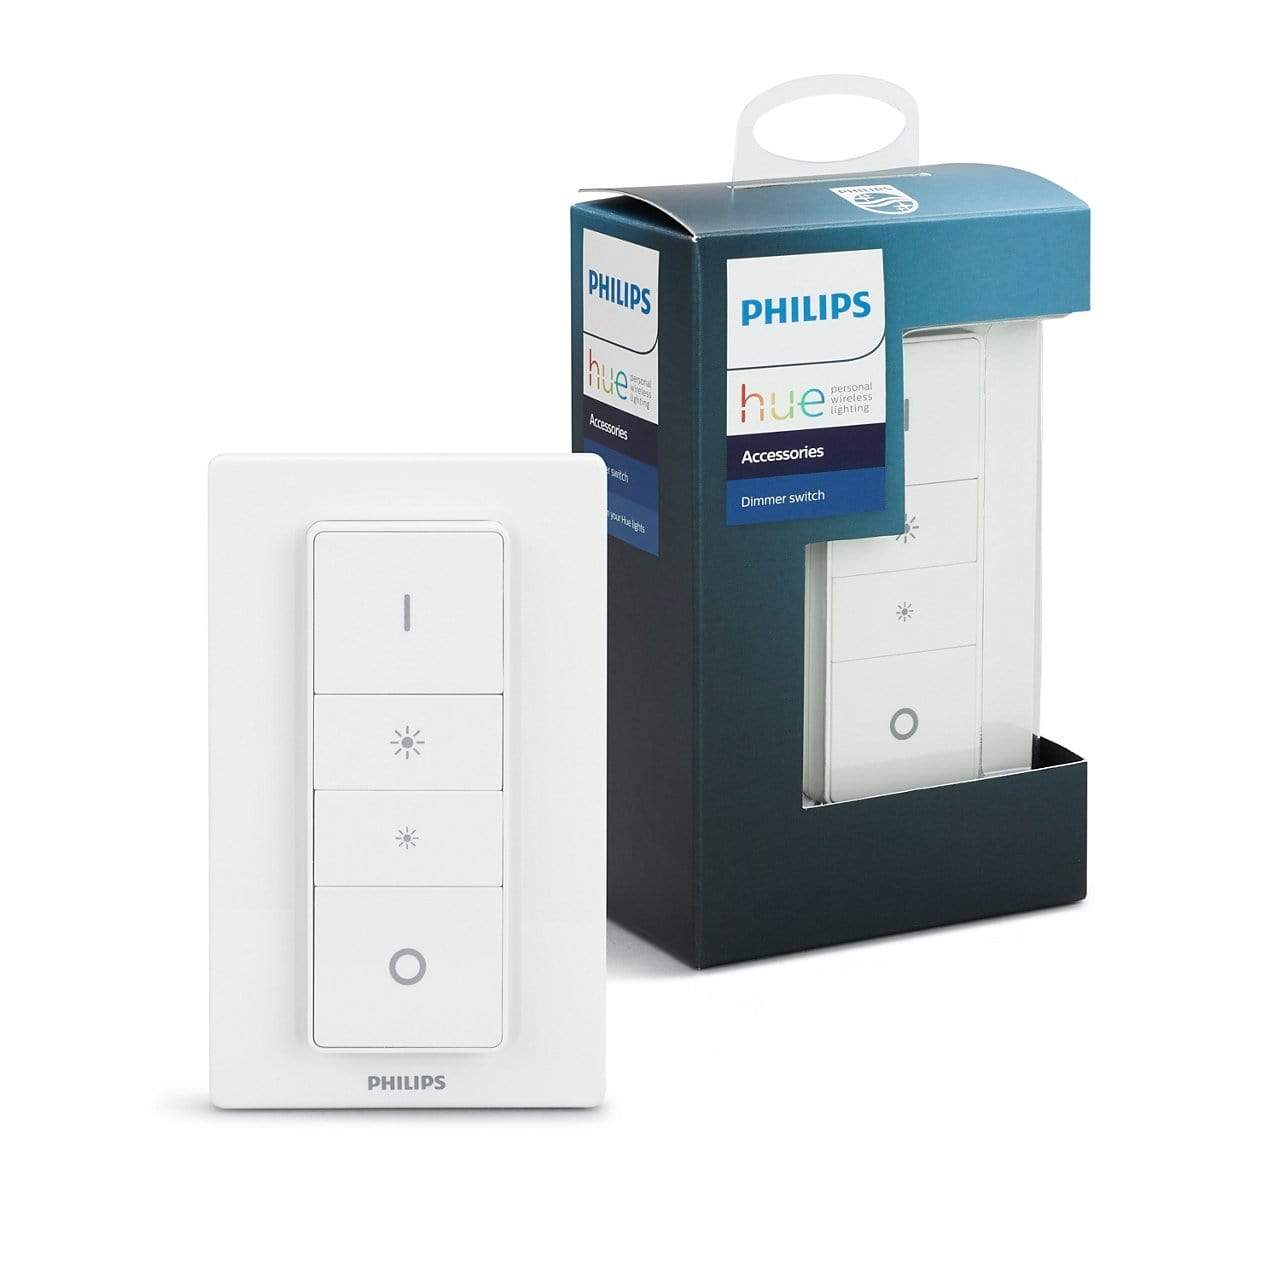 PHILIPS Hue Dimmer Switch - DELIGHT OptoElectronics Pte. Ltd